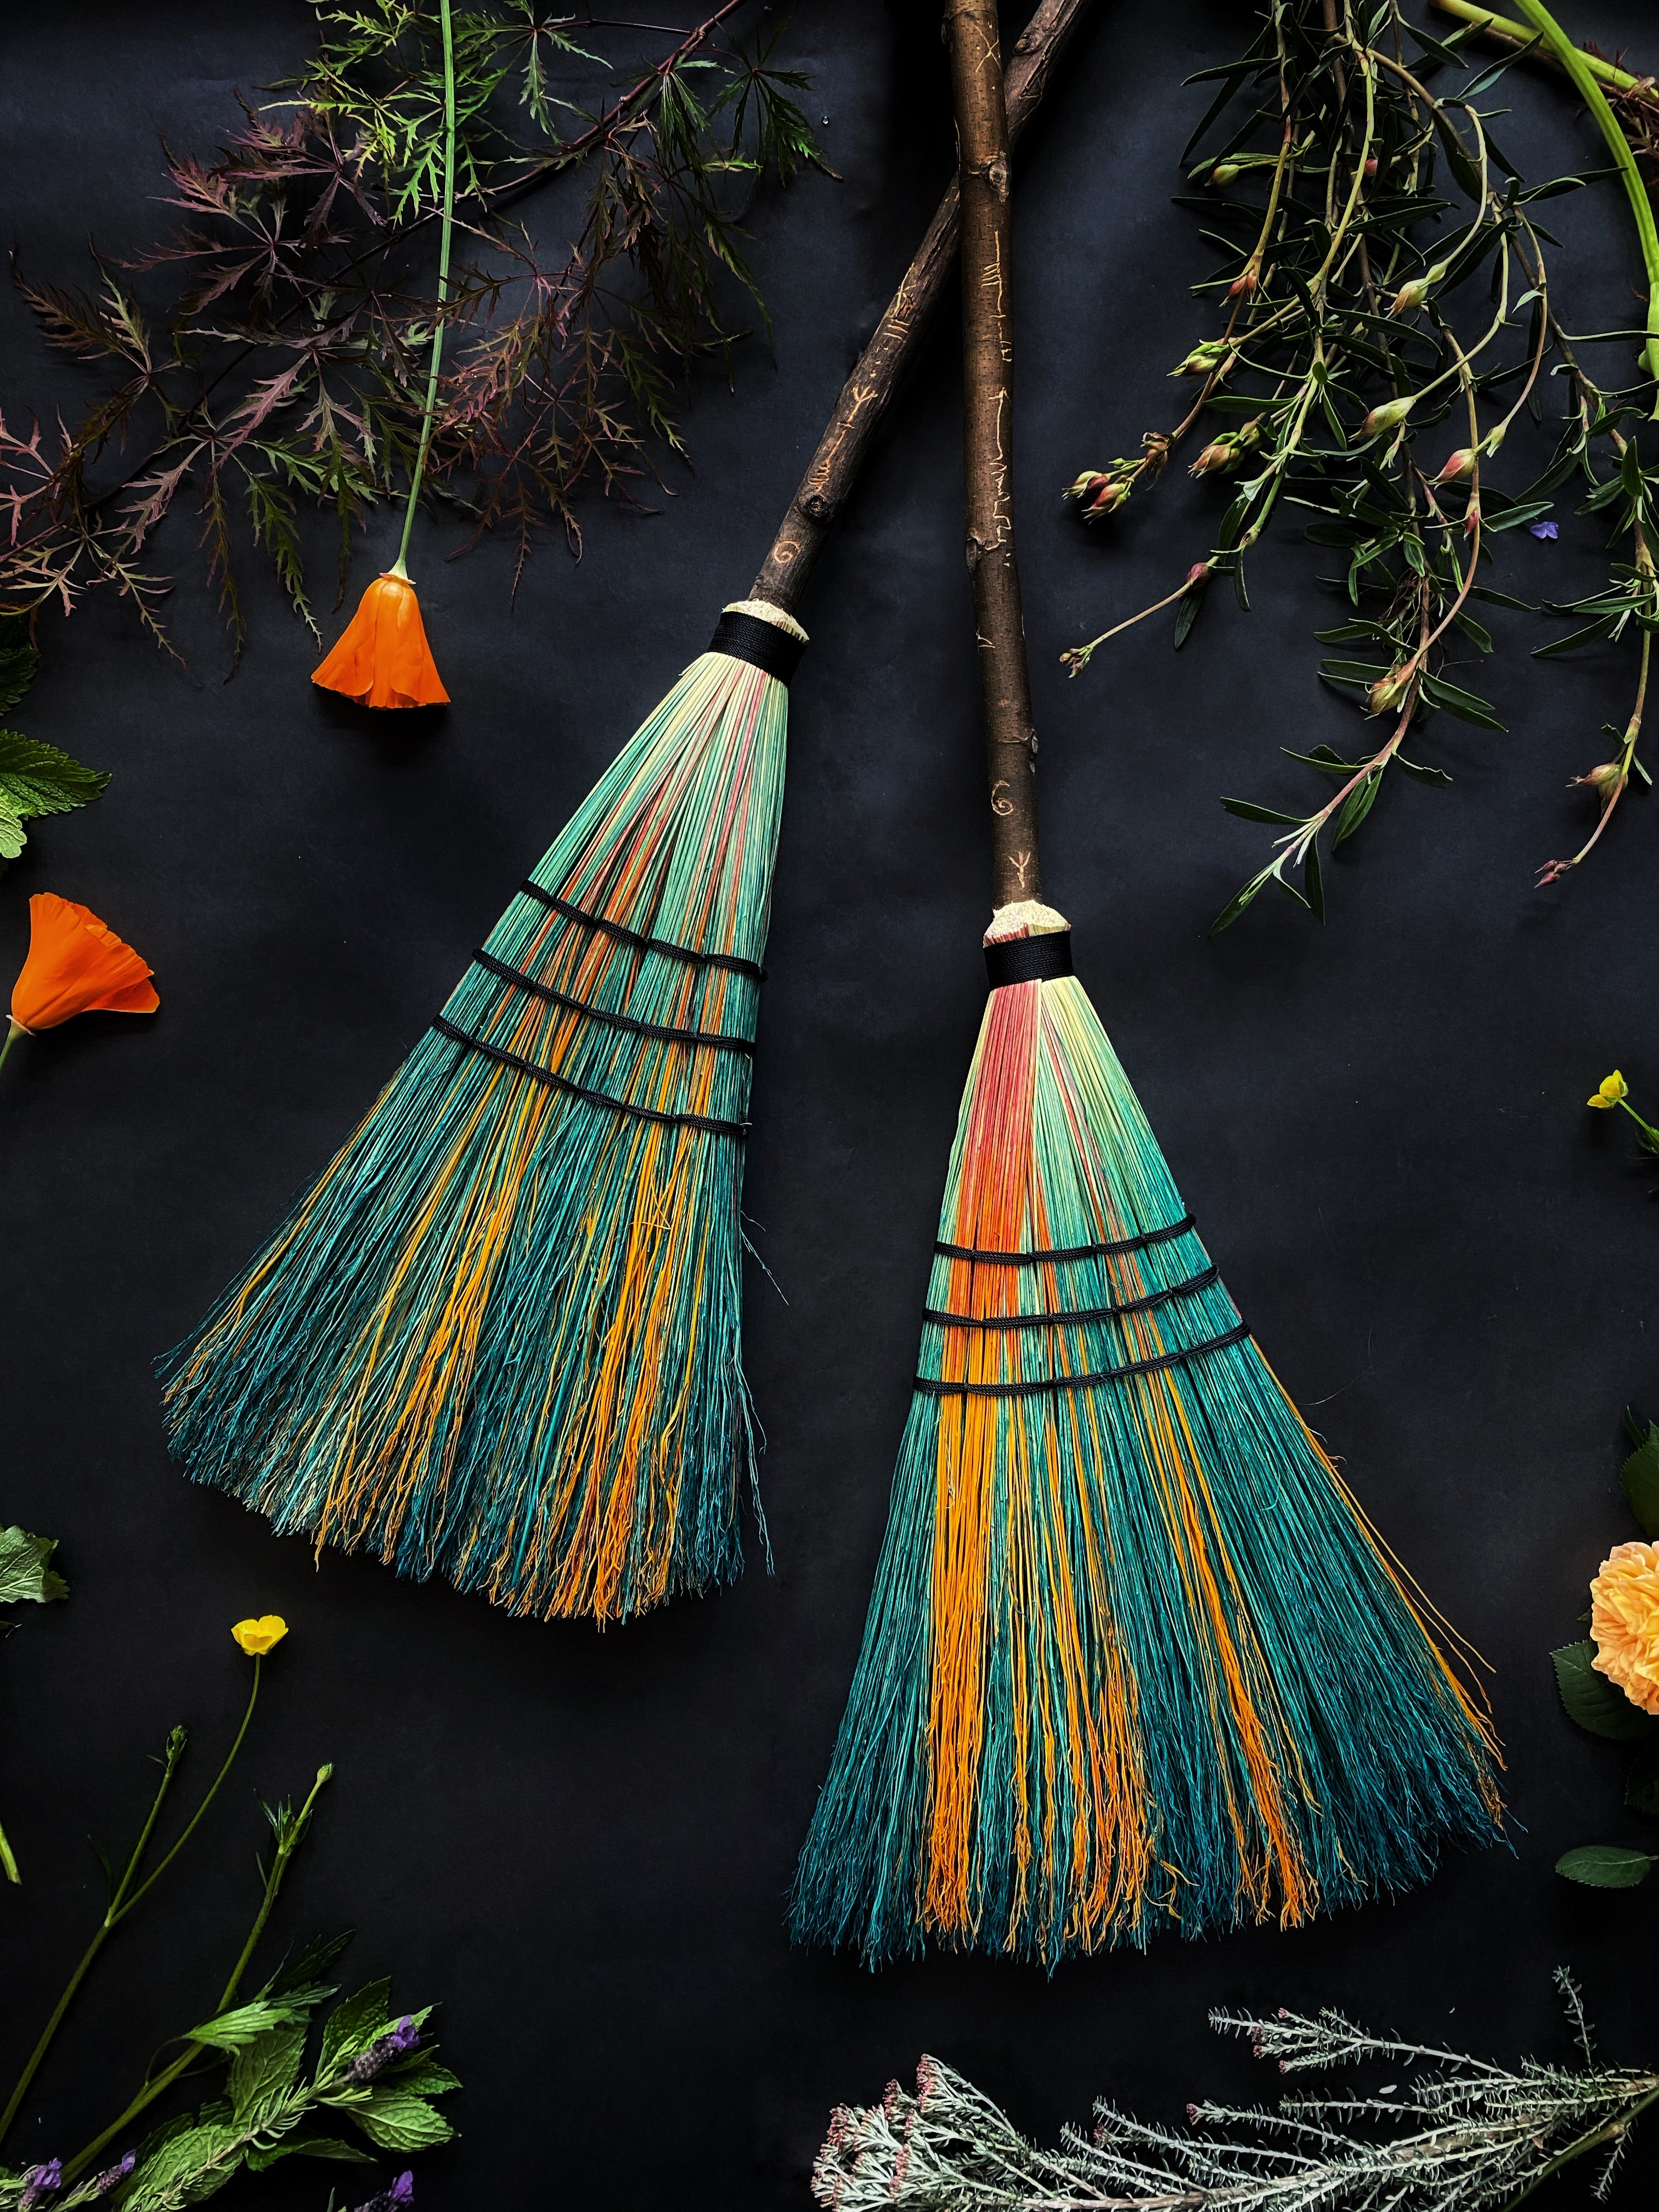 (Live / Virtual) A Witch's Kitchen Sweeper Broom Workshop - (Postponed) Online The House of Twigs Workshop